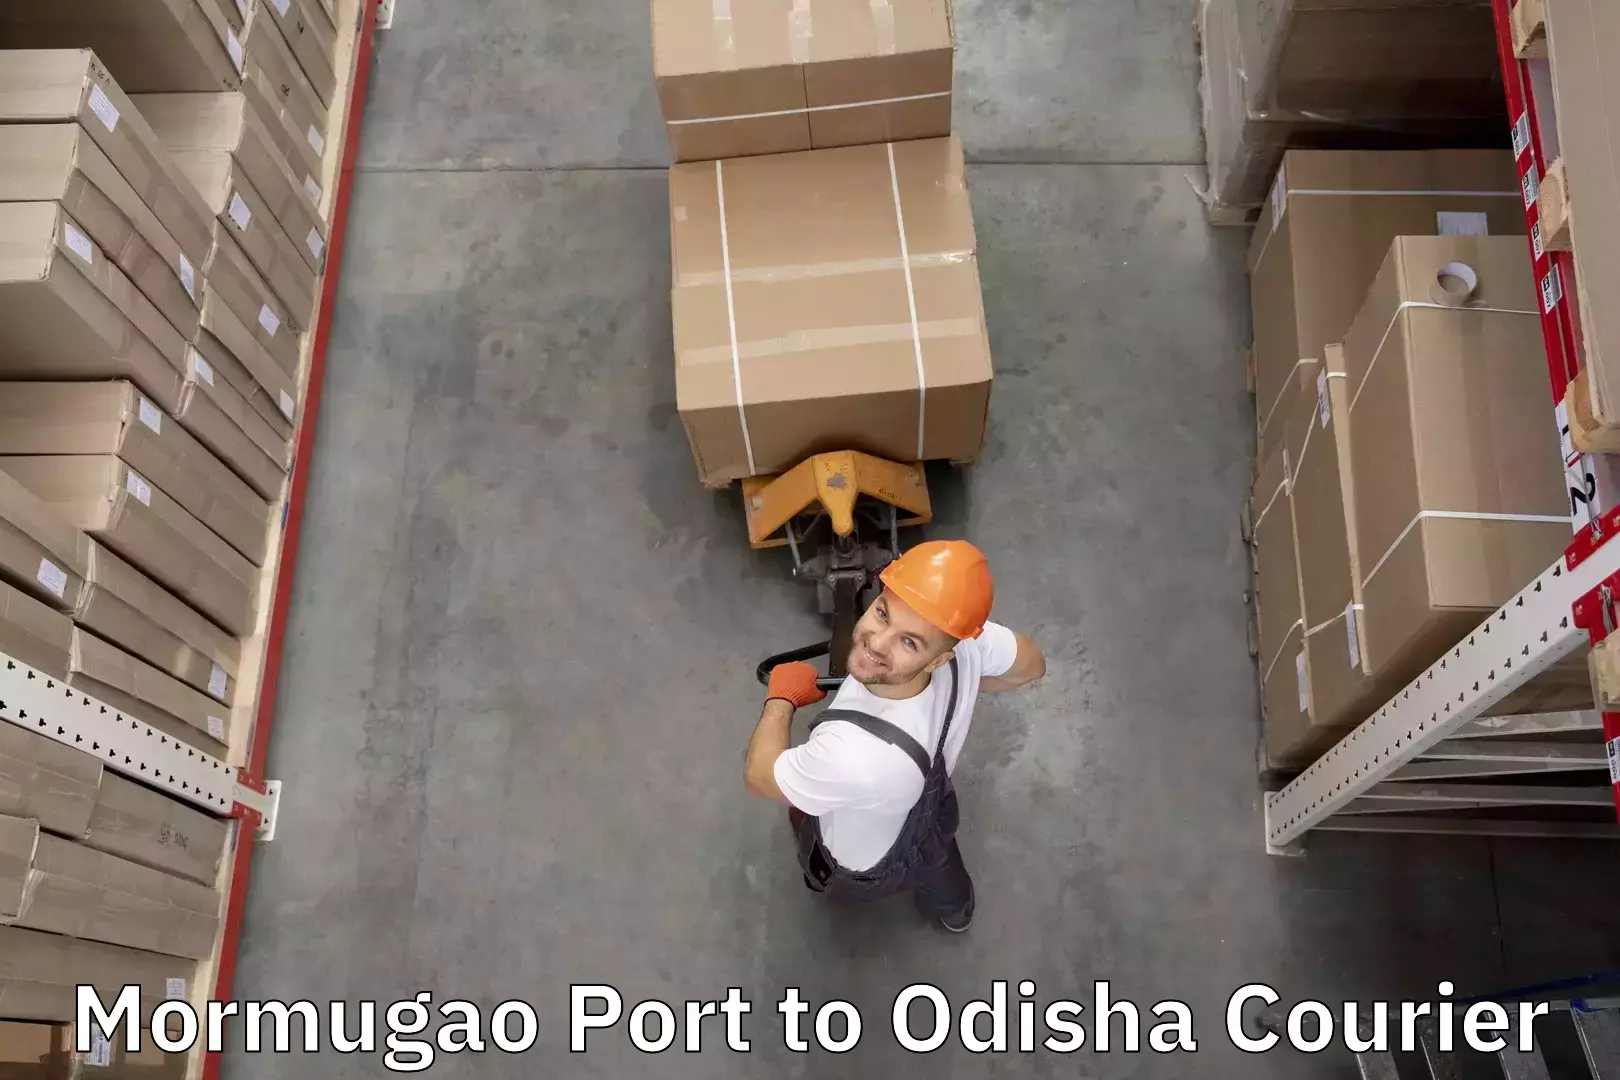 Excess baggage transport in Mormugao Port to Titilagarh